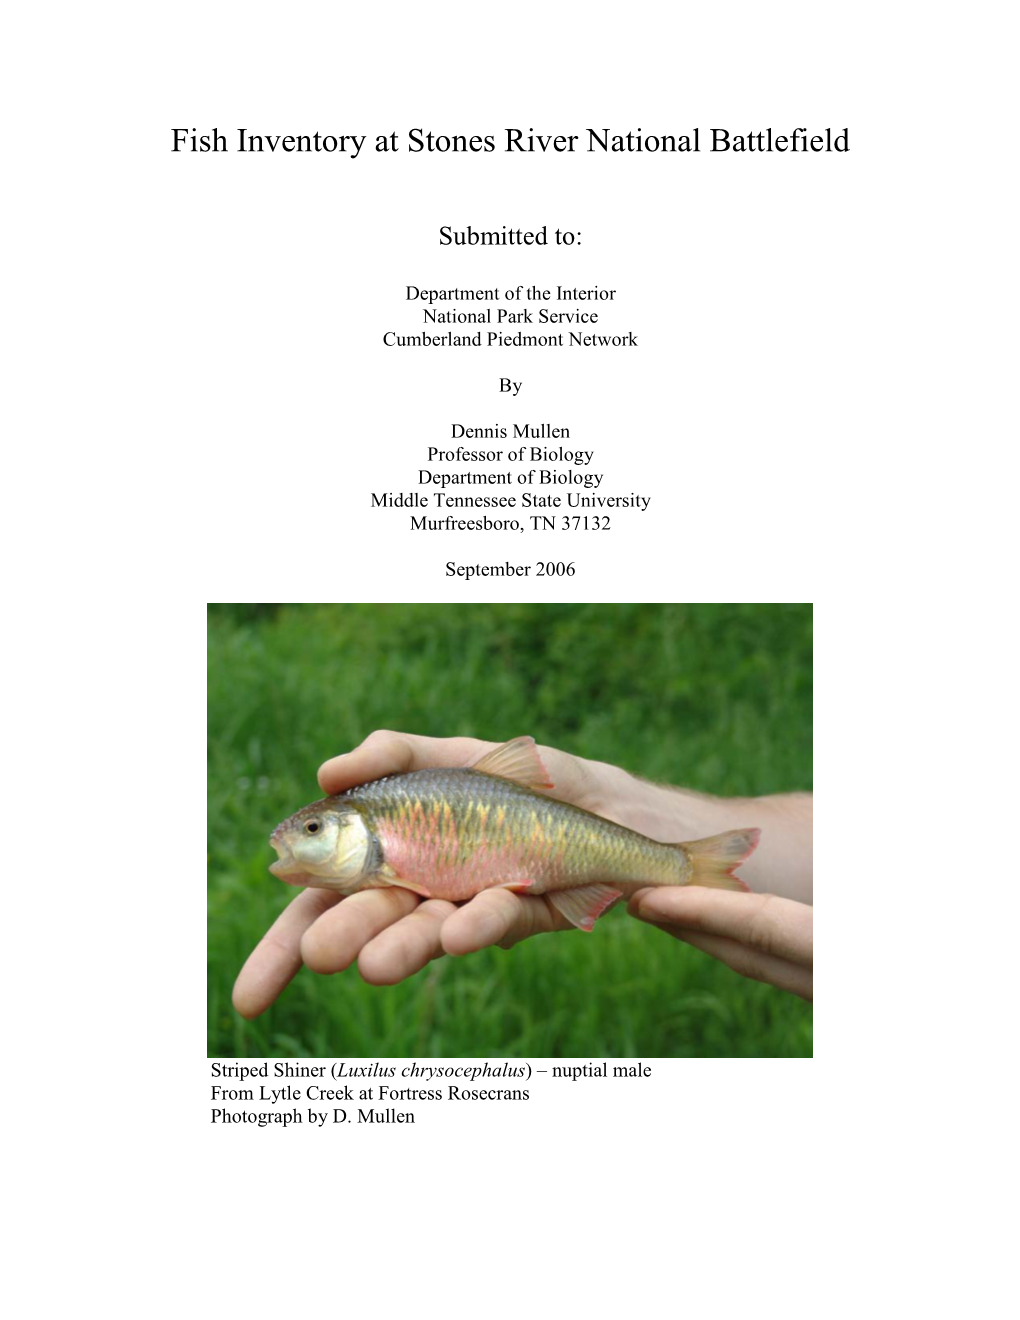 Appendix E: Voucher Photographs and Ecological Description of Fish Species Captured in and Around Stones River National Battlefield